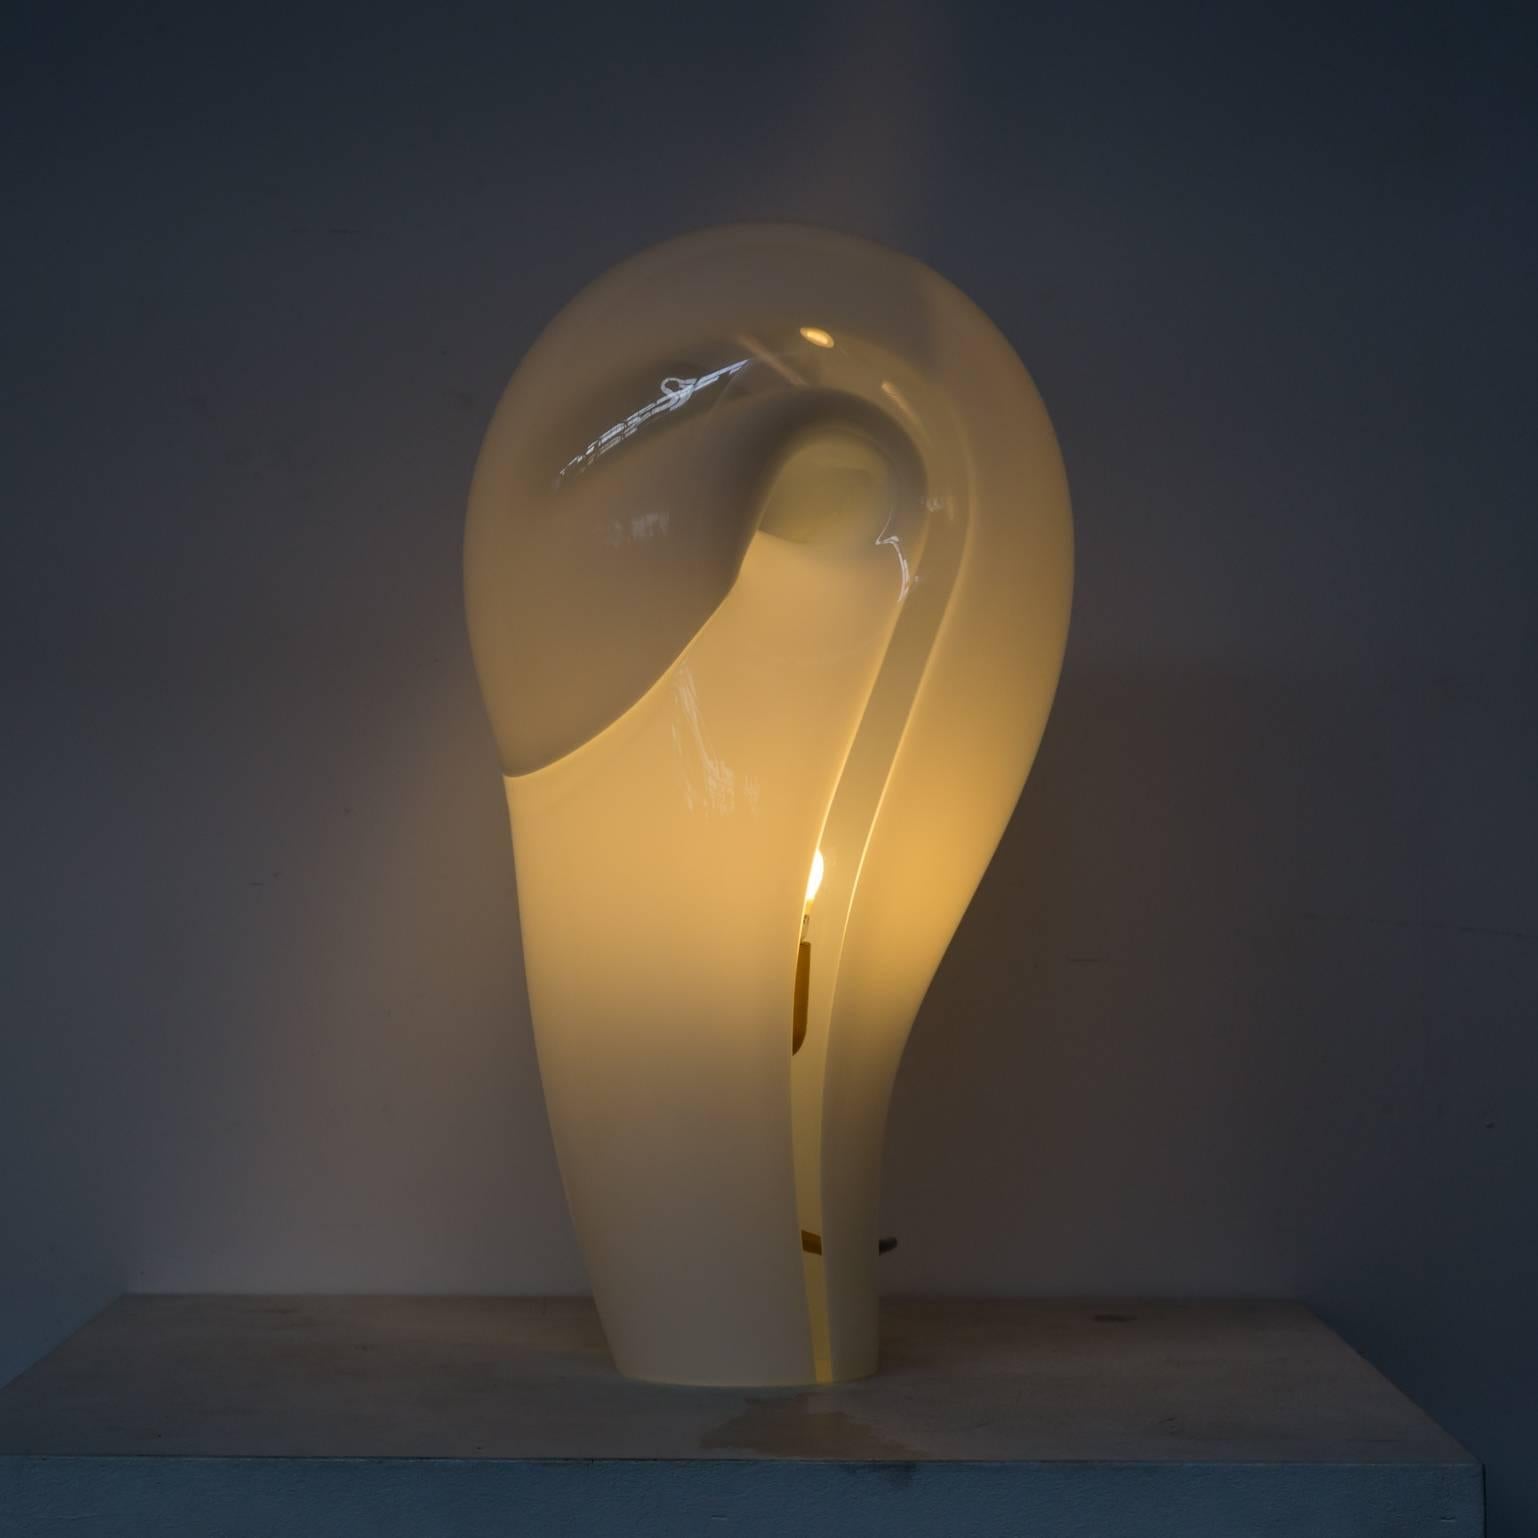 1980s glass design table lamp. Good and working condition, consistent with age and use.